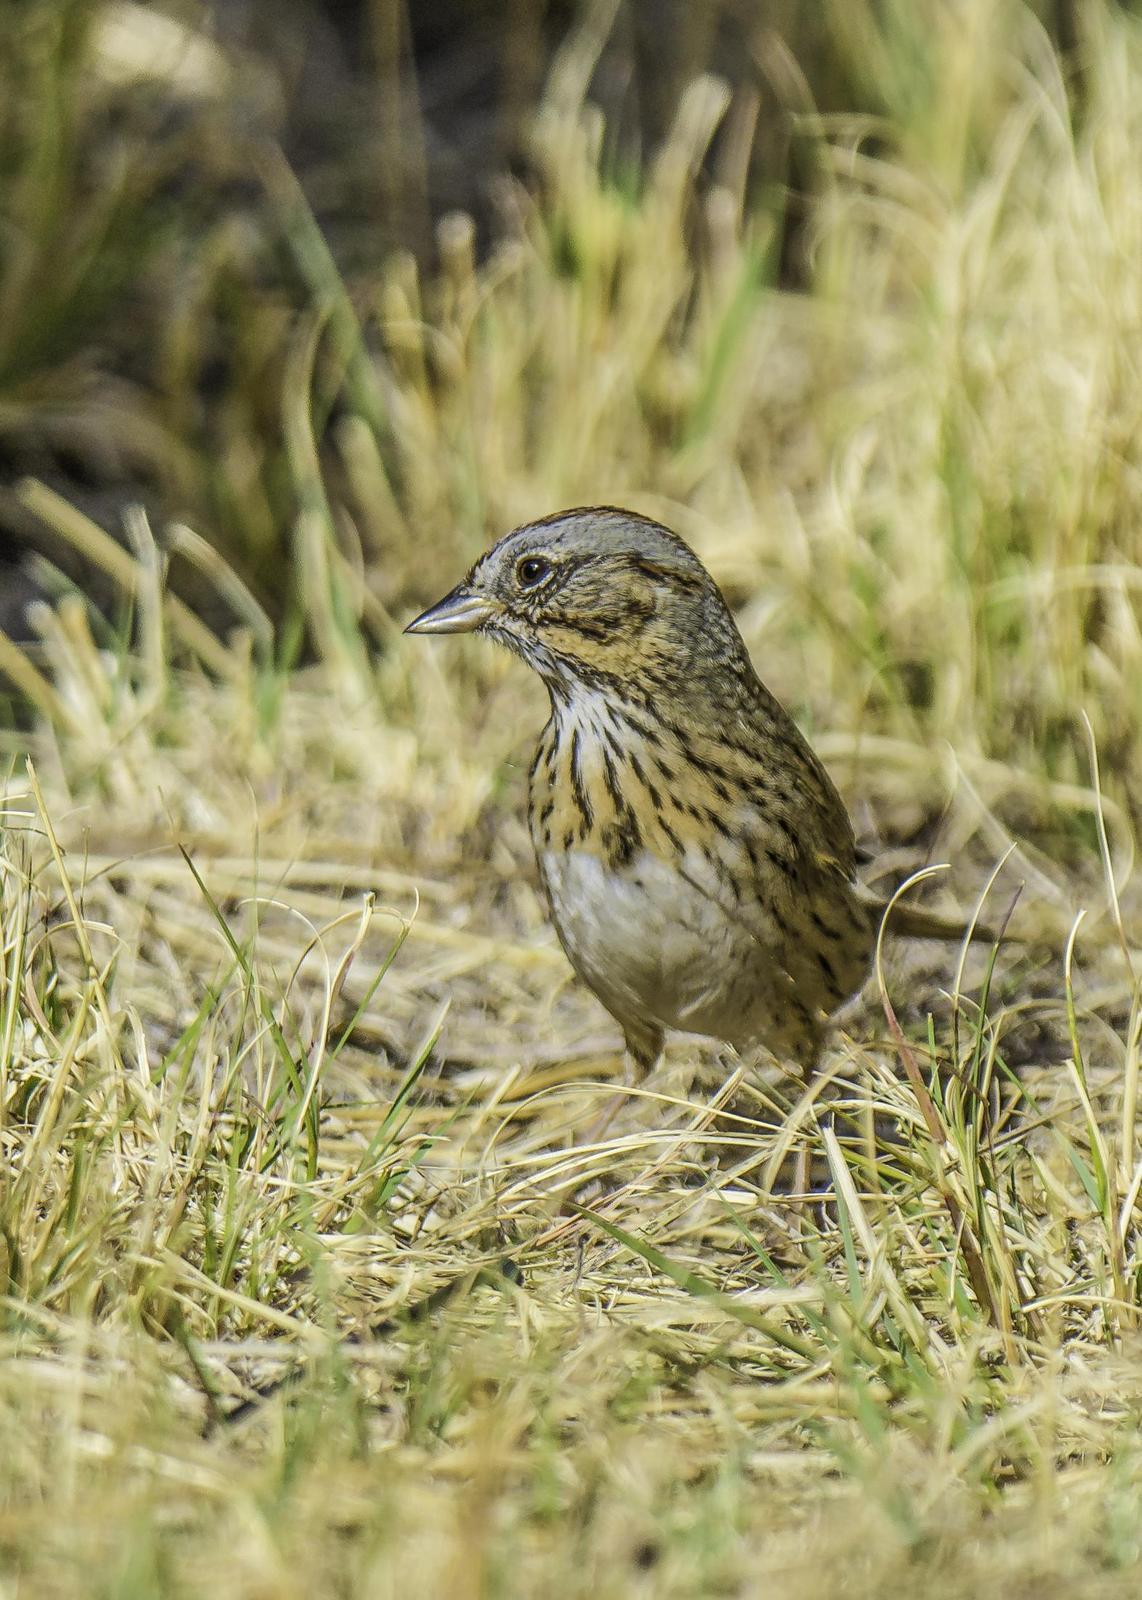 Lincoln's Sparrow Photo by Mason Rose